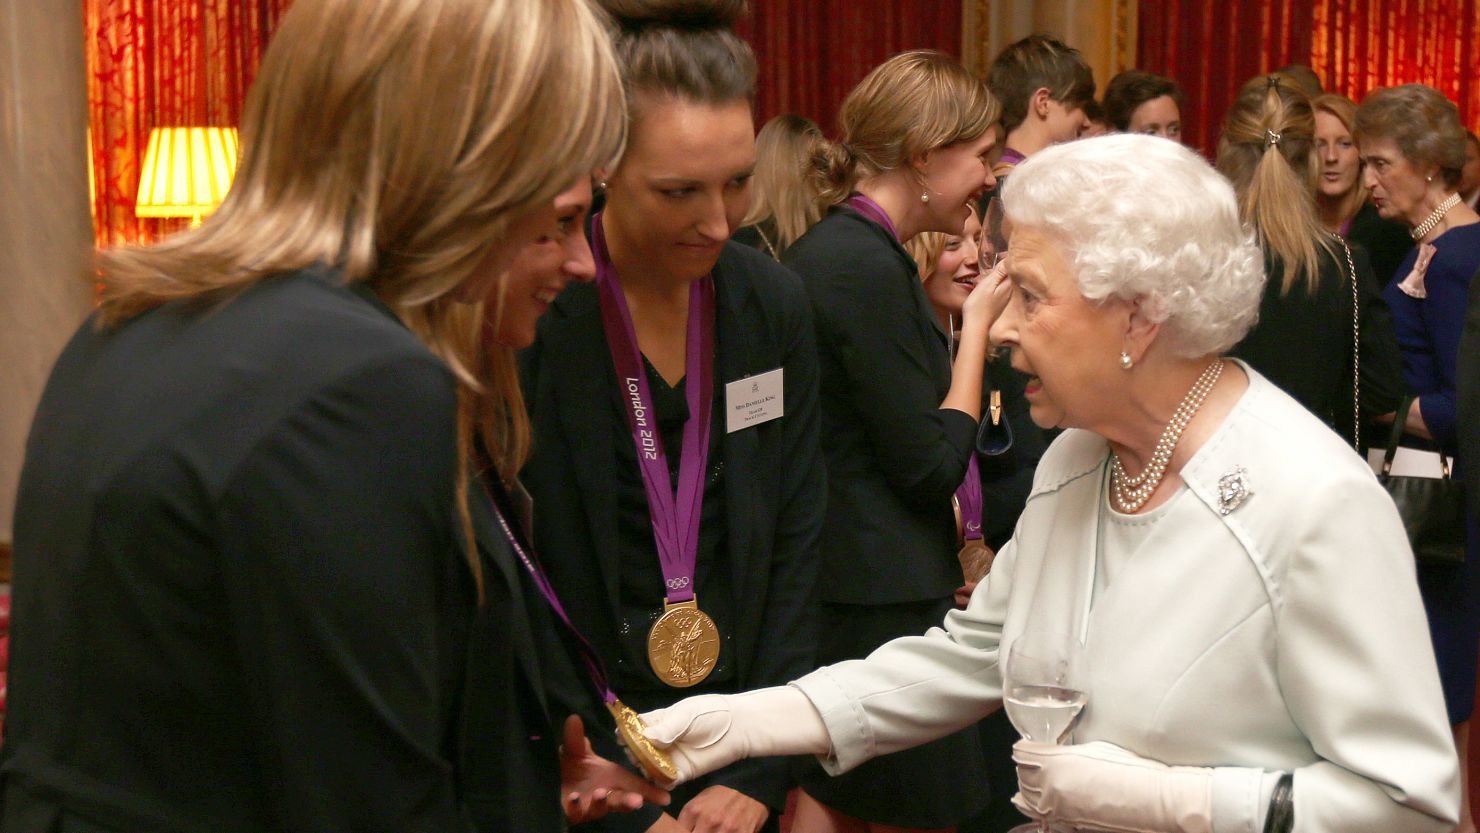 The Queen meets British Olympians at a reception hours before two athletes had their medals stolen from a nightclub.